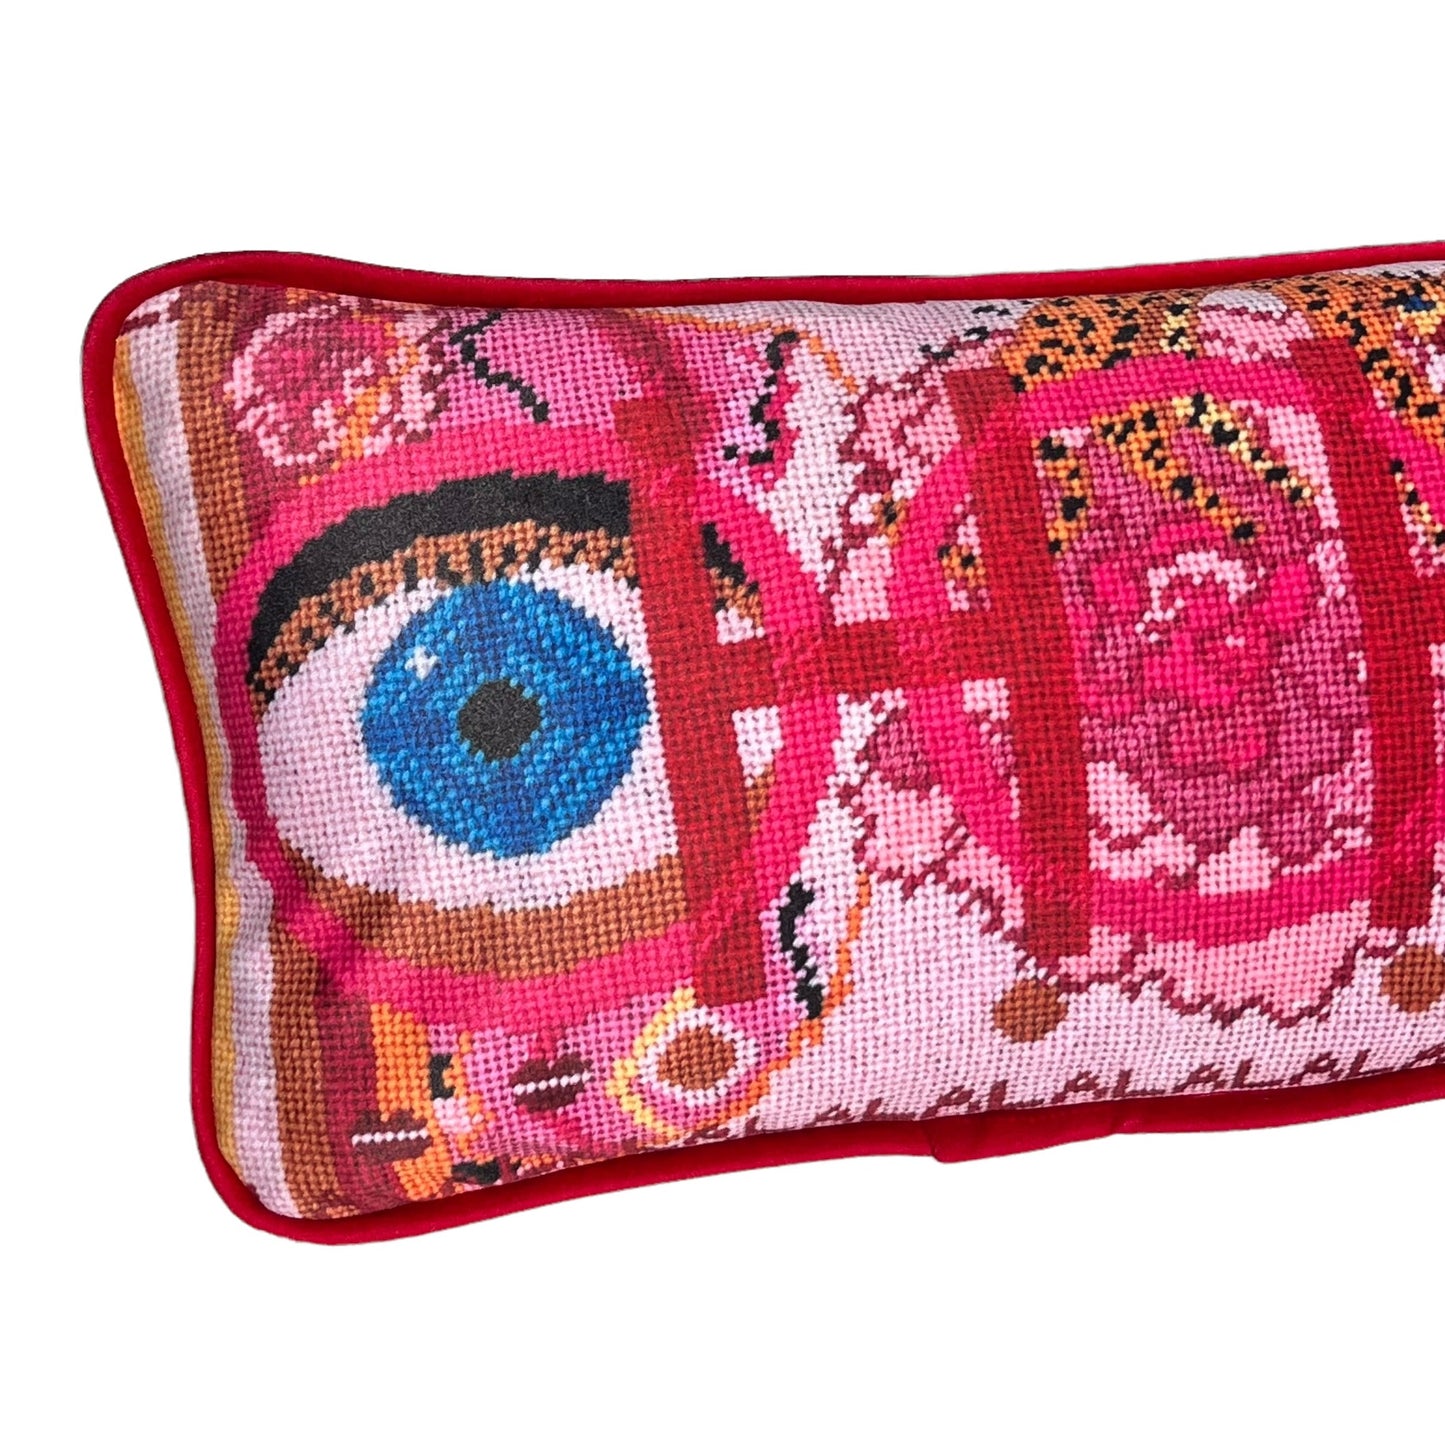 velvet pillow with pink and red colorful pattern, blue eye, cheetah, heart snakes, roses and lettering OOH in center with a LA LA LA border